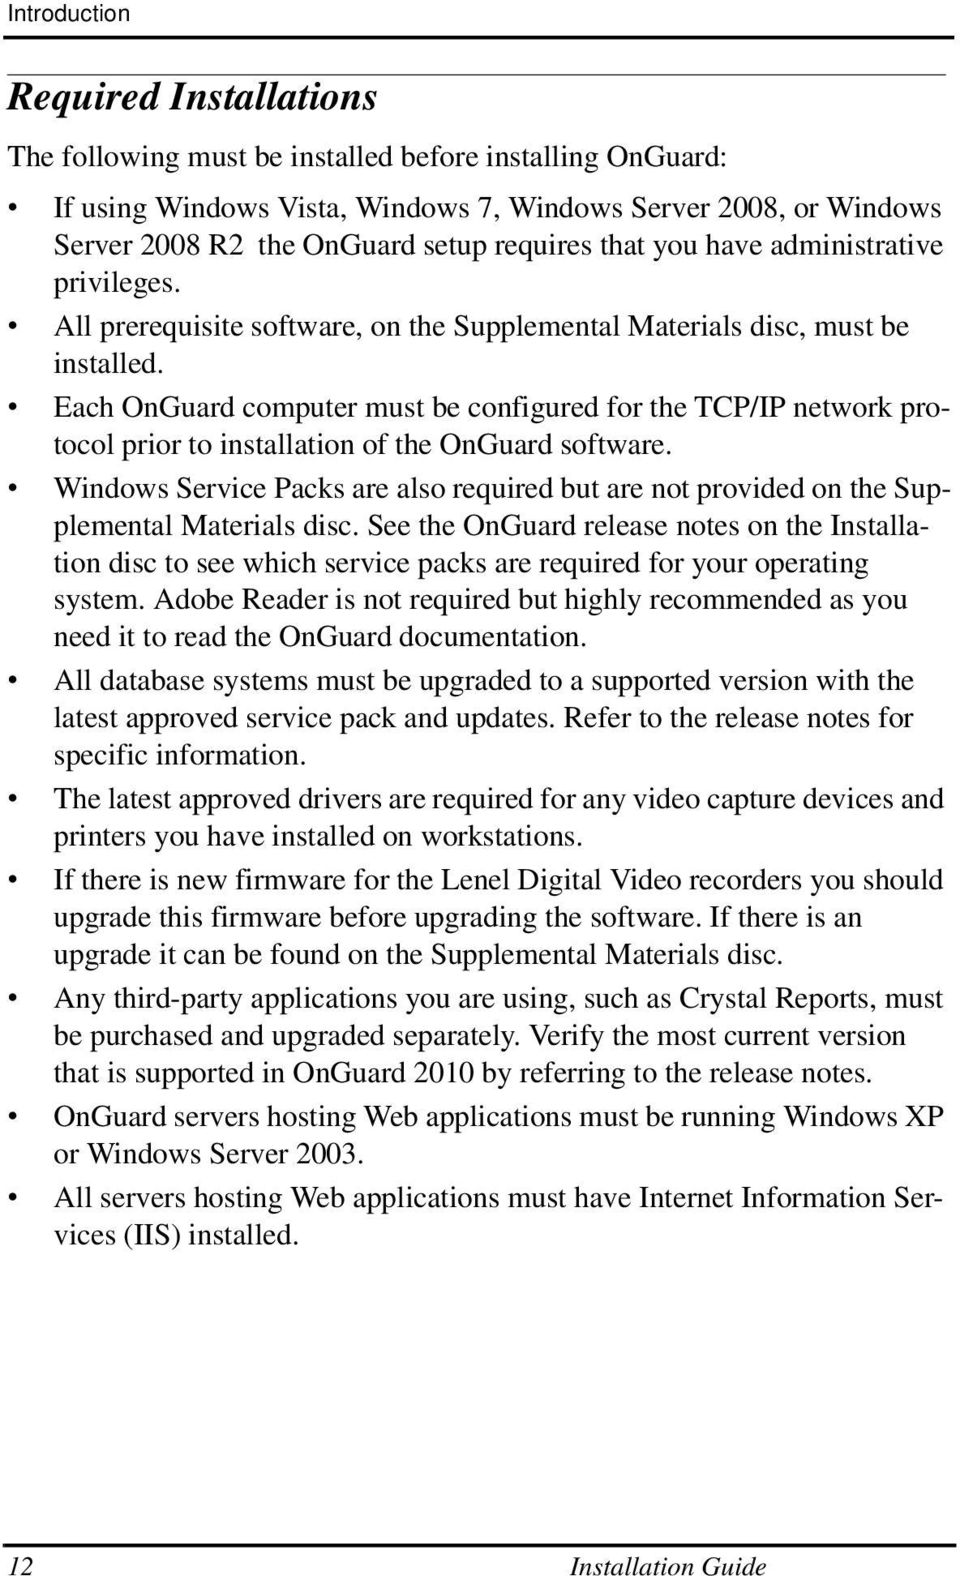 Each OnGuard computer must be configured for the TCP/IP network protocol prior to installation of the OnGuard software.